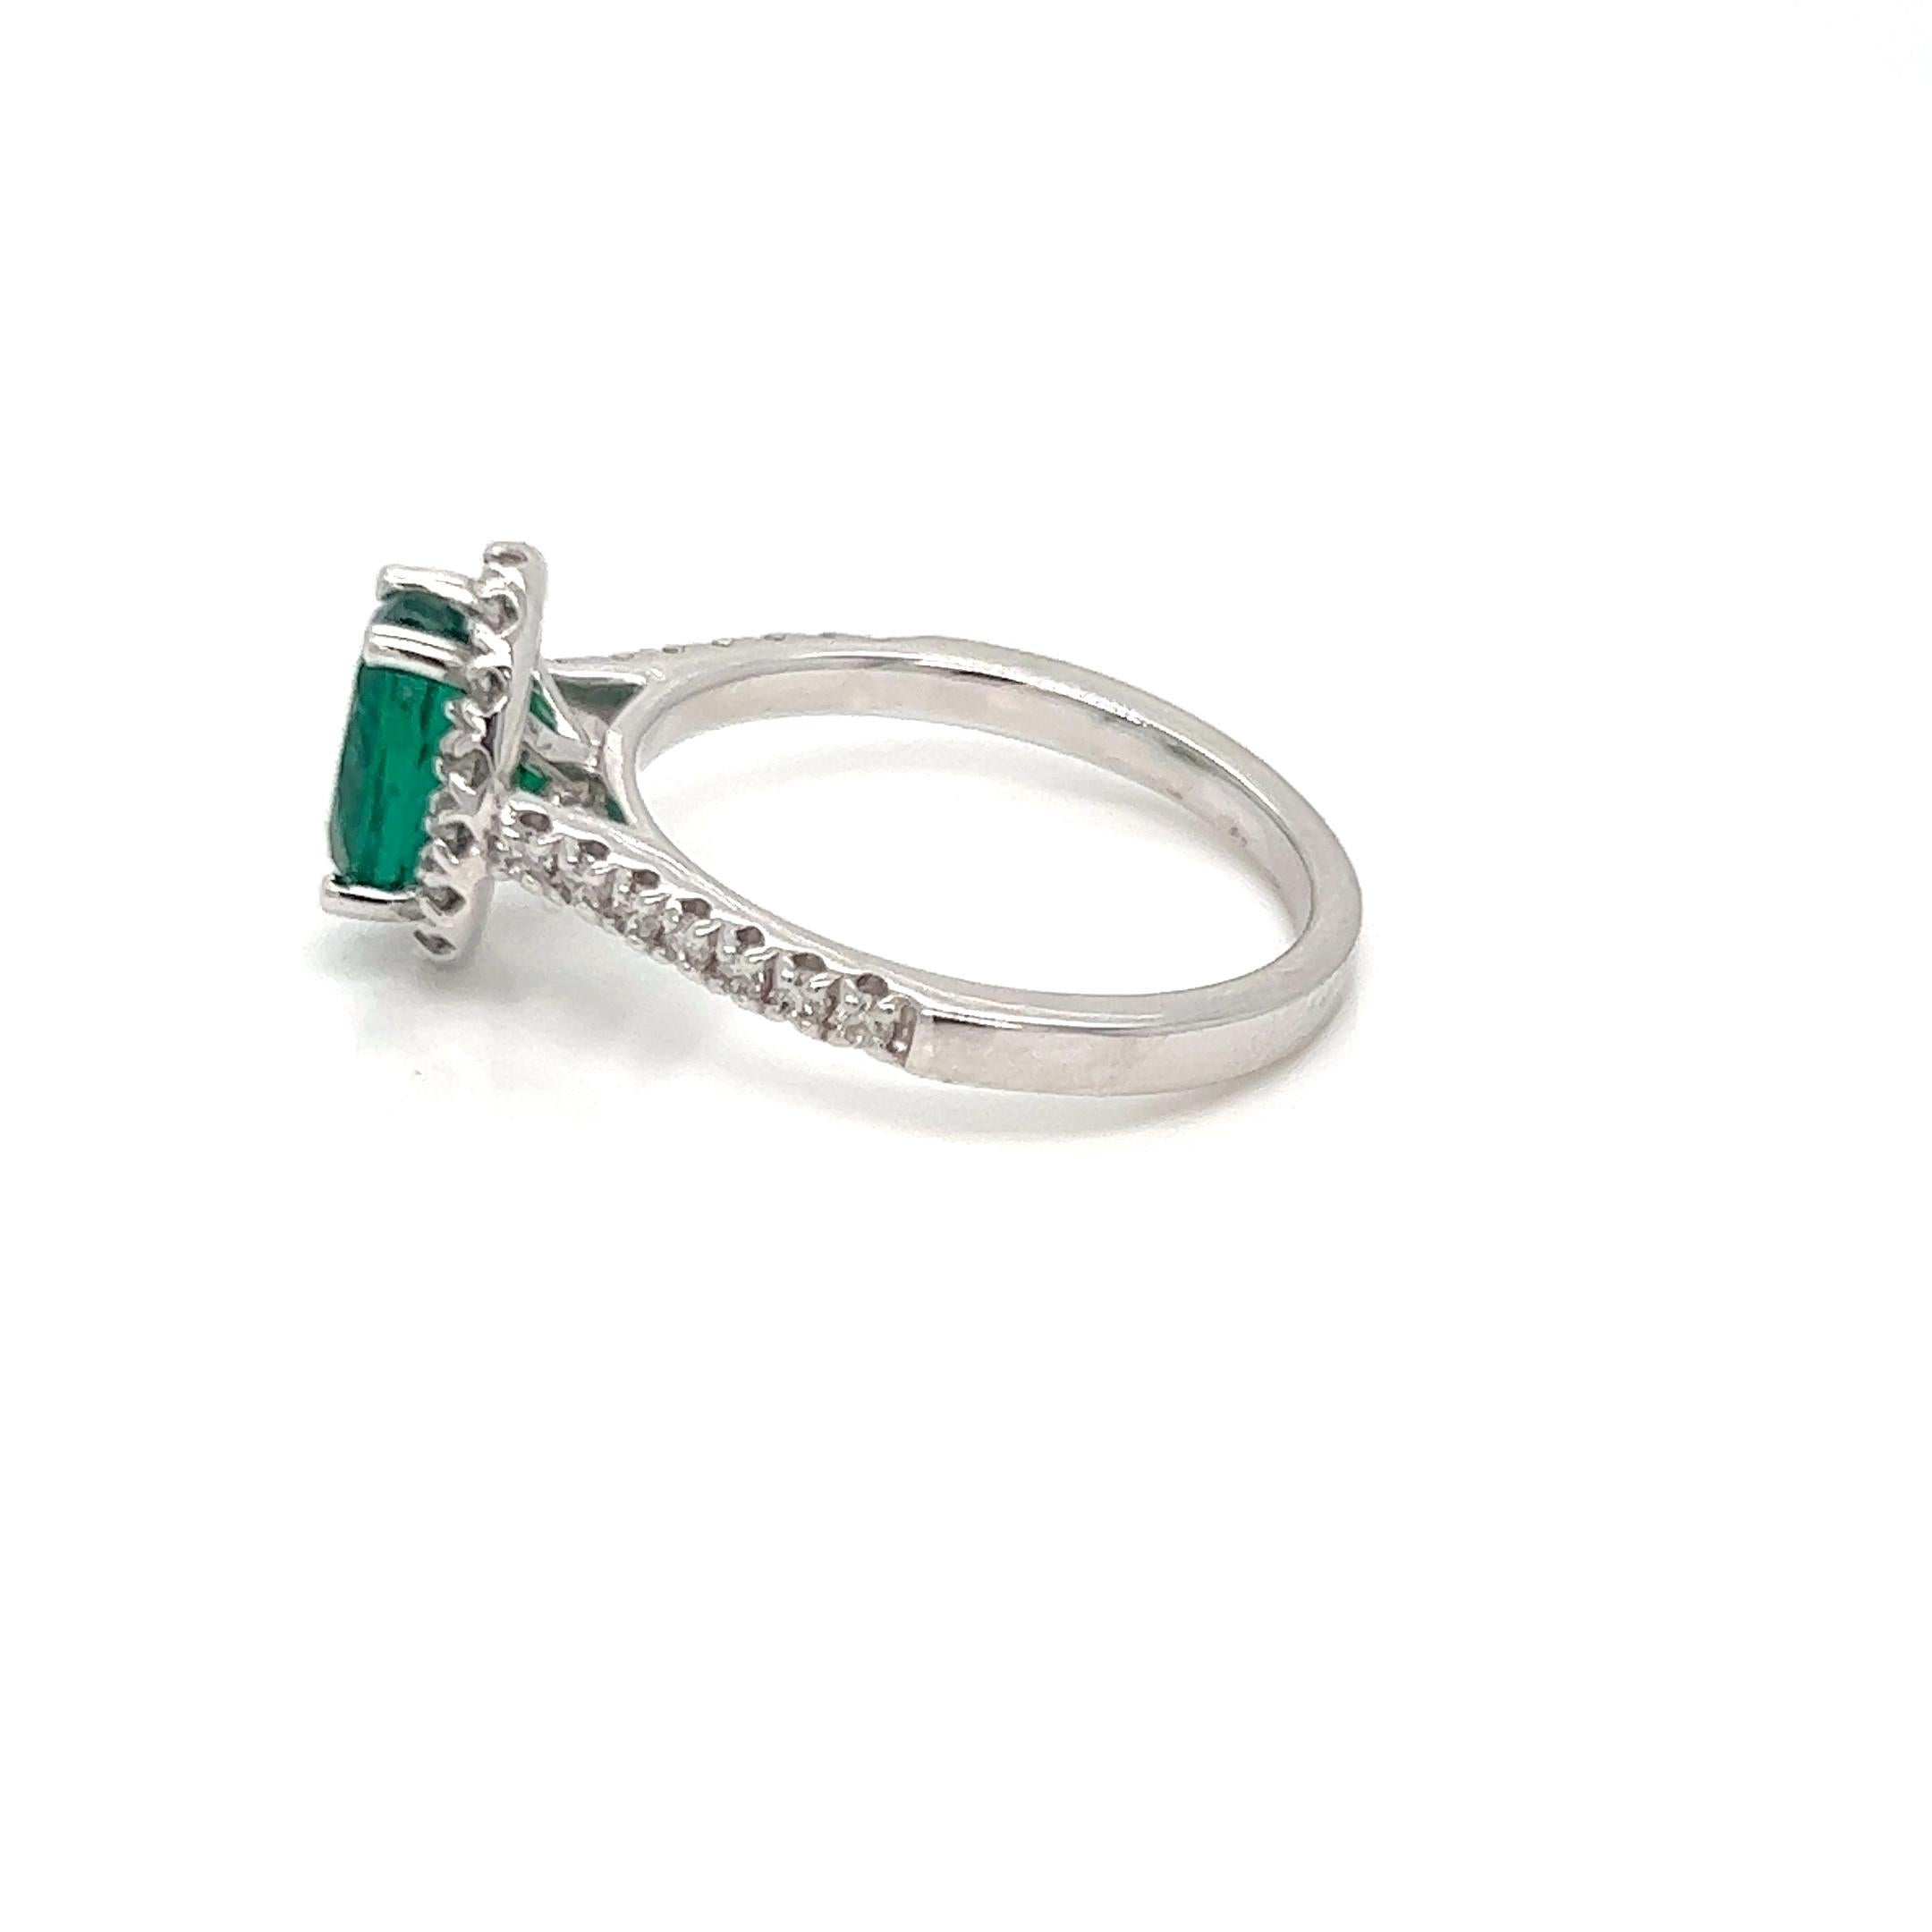 Presenting our magnificent 1.87 carat Oval Cut Zambian Emerald and Diamond Halo Engagement Ring, a magnificent work of art that radiates class and refinement. This ring is as distinctive as your love tale, fusing the ageless charm of a Zambian